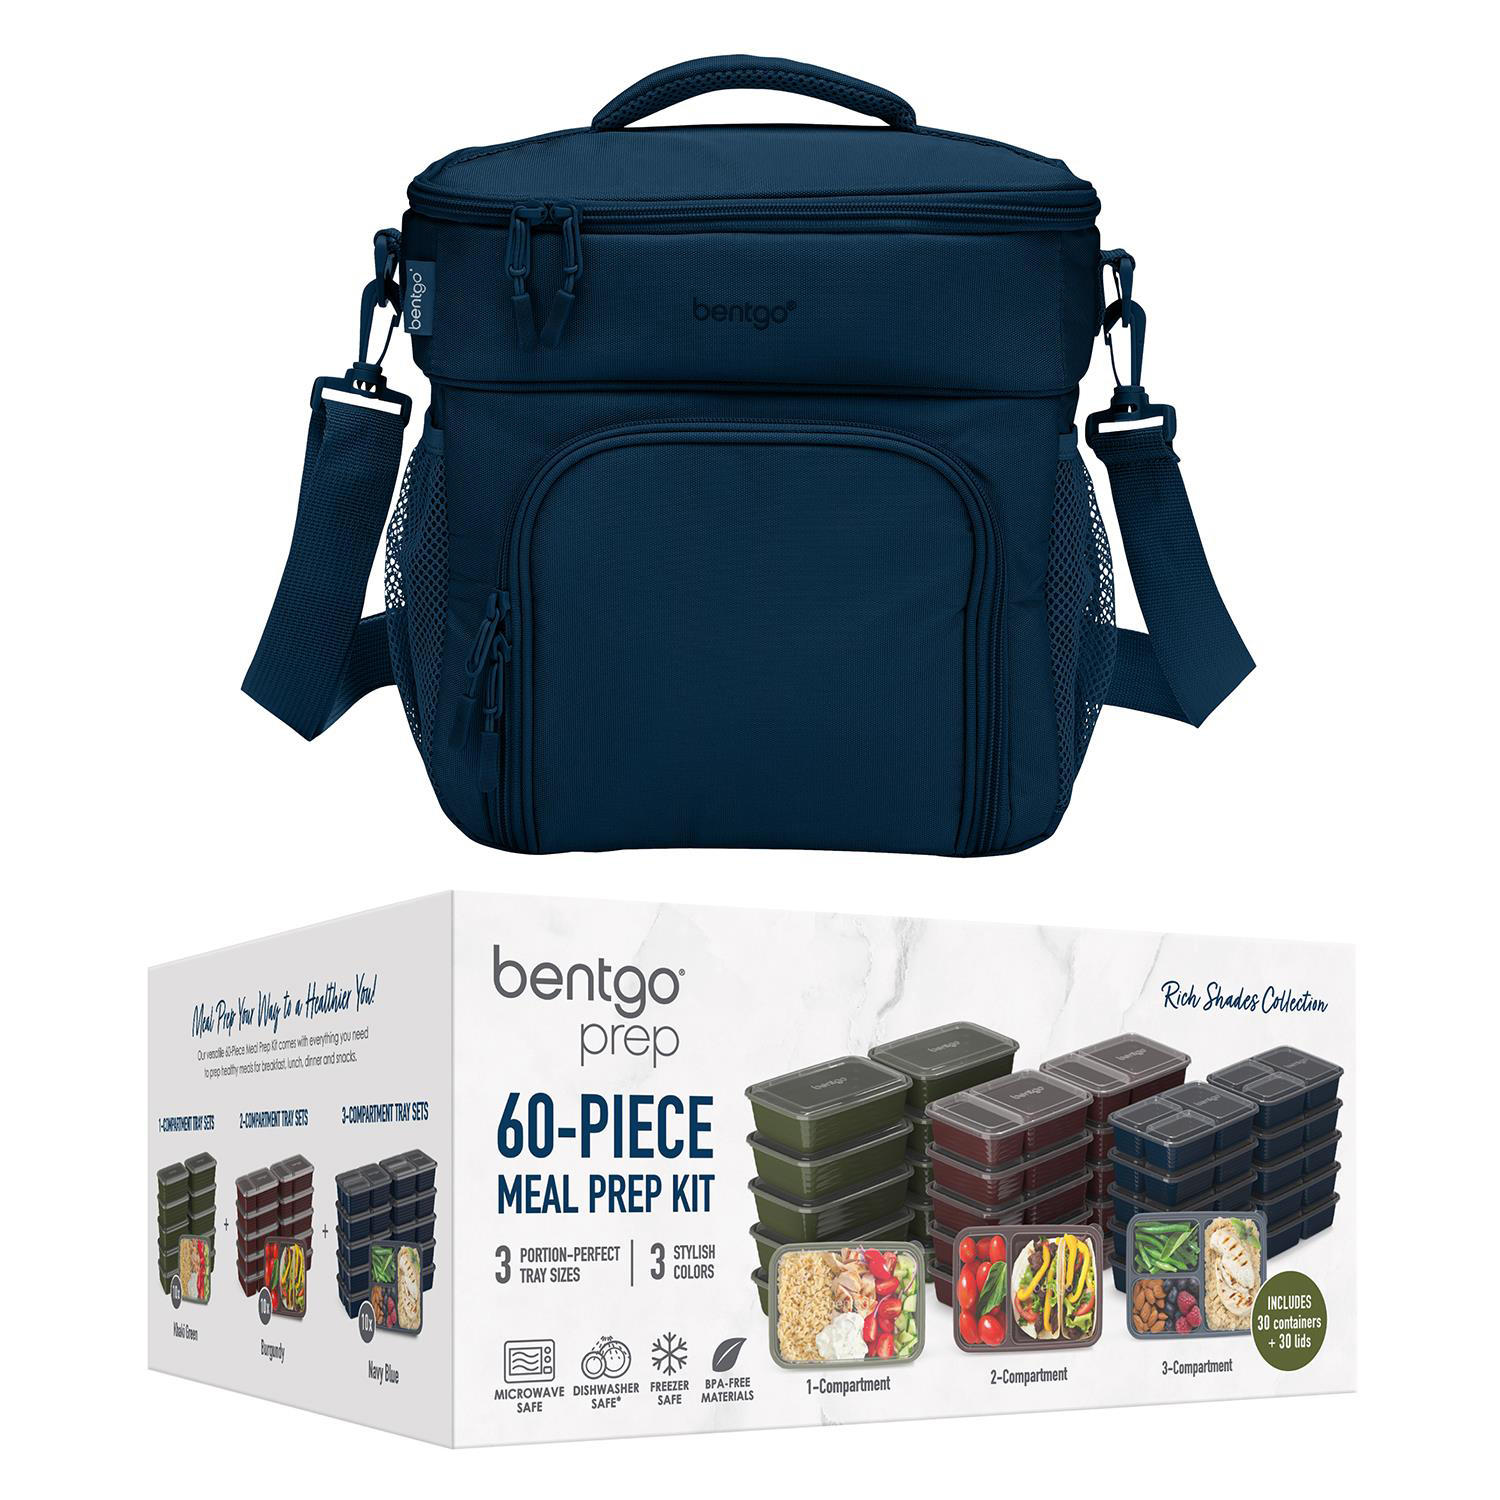 https://bigbigmart.com/wp-content/uploads/2022/07/Bentgo%C2%AE-Prep-Deluxe-Multimeal-Bag-Premium-Insulation-up-to-8-Hrs-with-Water-Resistant-Exterior-Interior-Extra-Large-Lunch-Bag-Holds-4-Meals-Snacks-Great-for-All-Day-Meal-Prep-Navy-Blue1.jpg